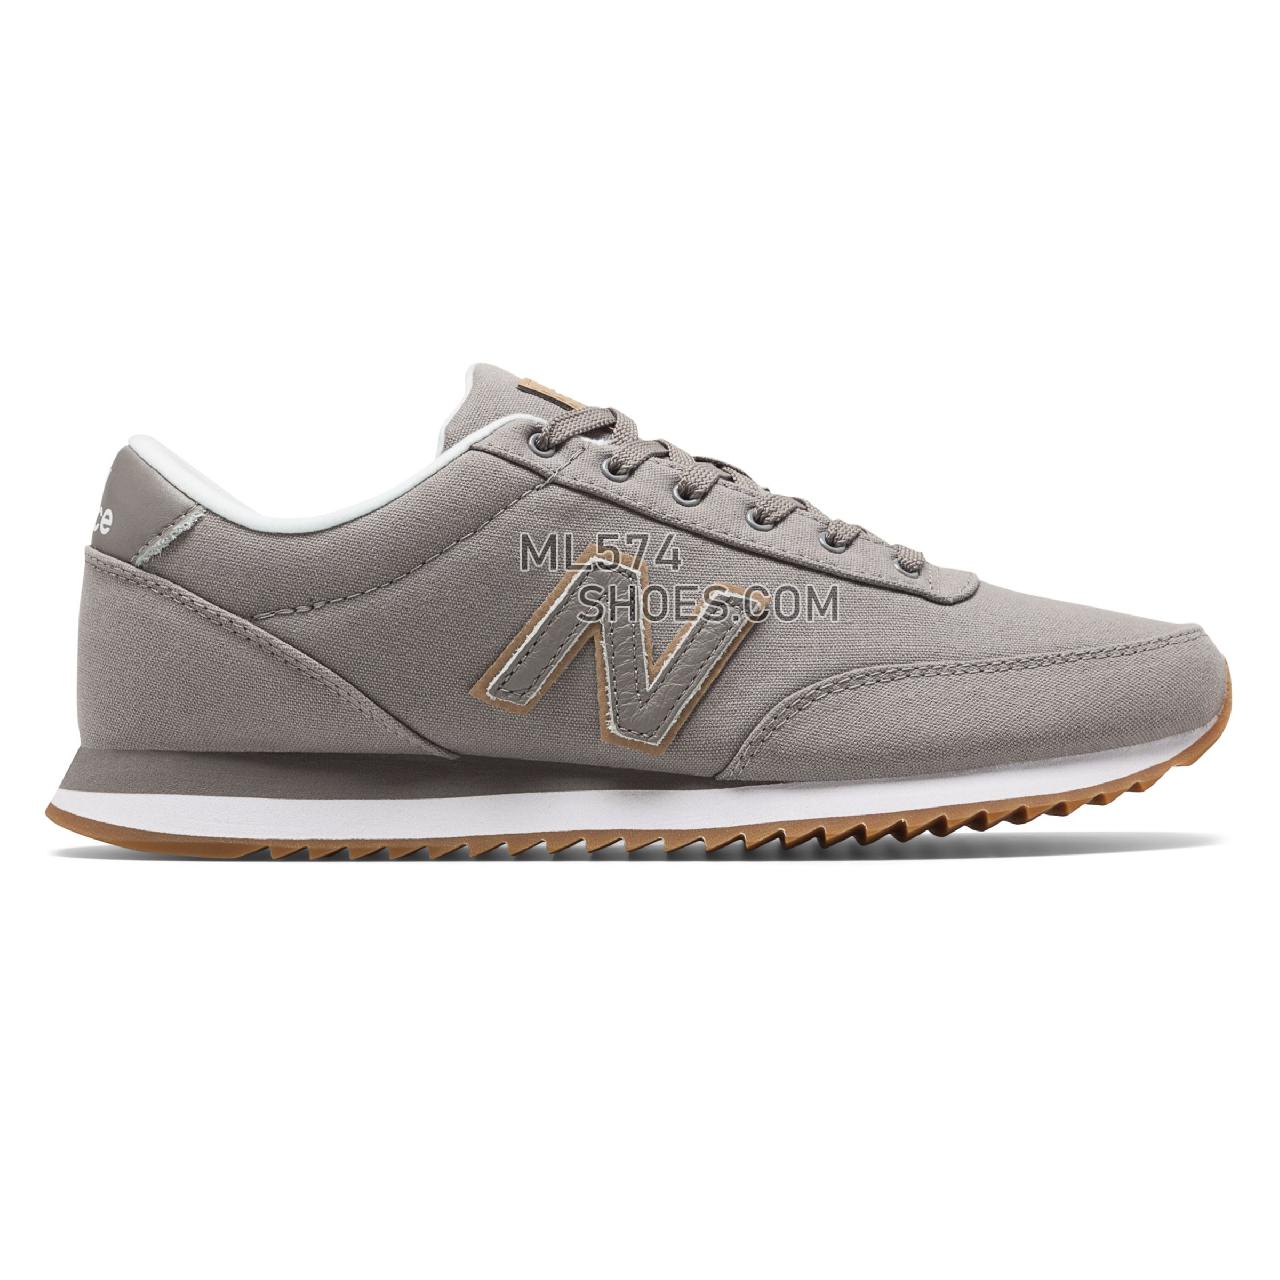 New Balance 501 - Men's Classic Sneakers - Grey with White - MZ501JAC